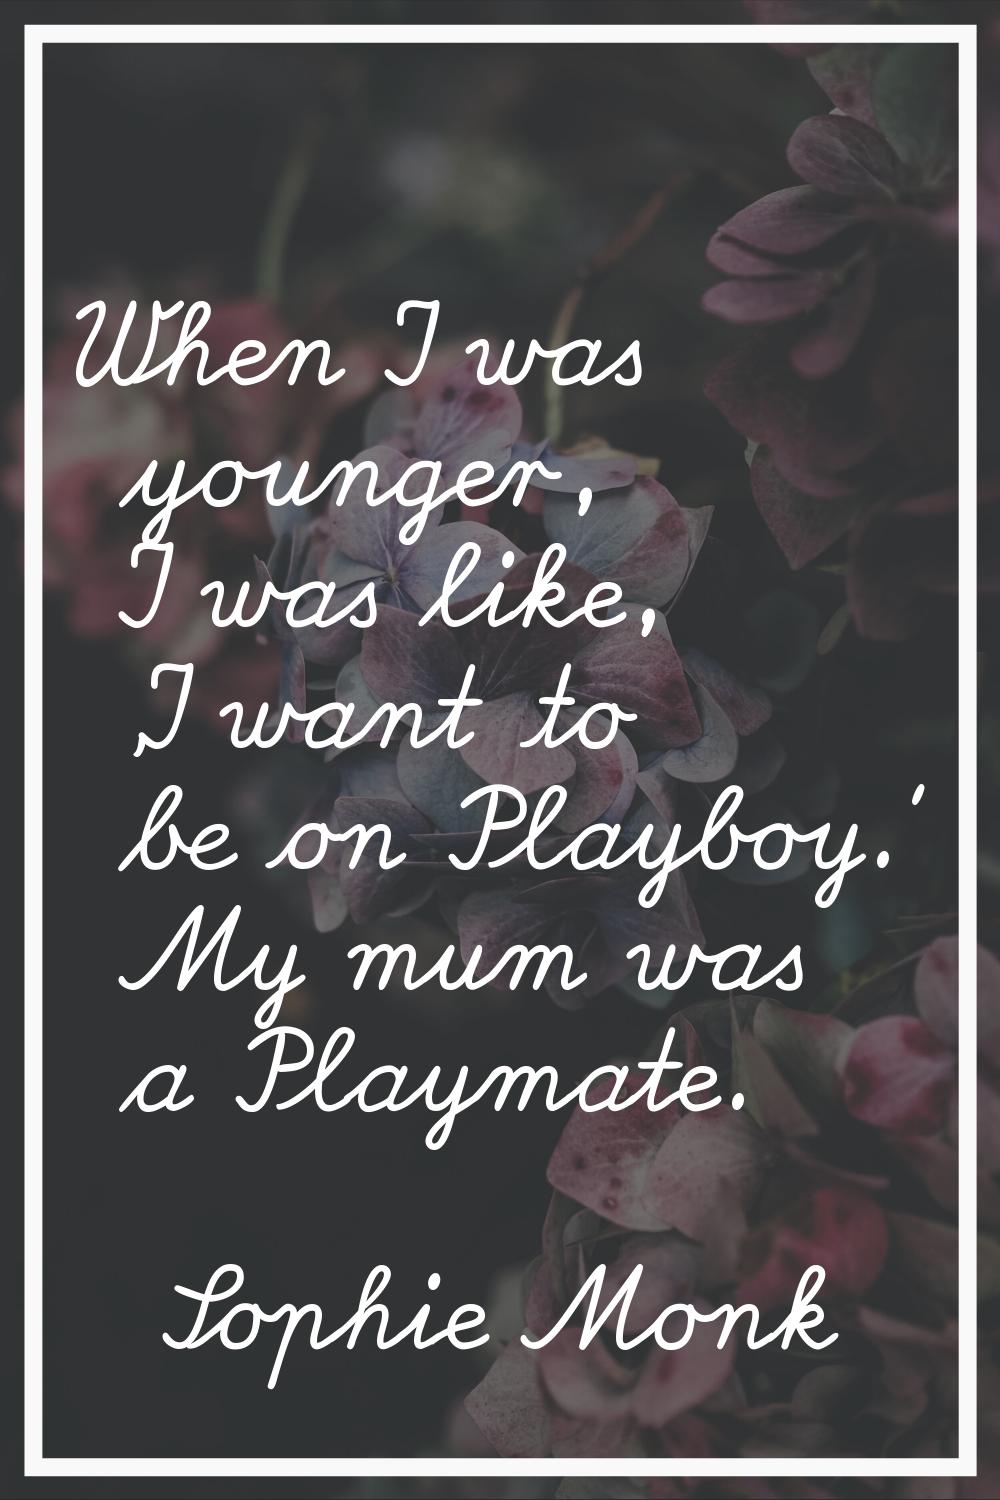 When I was younger, I was like, 'I want to be on Playboy.' My mum was a Playmate.